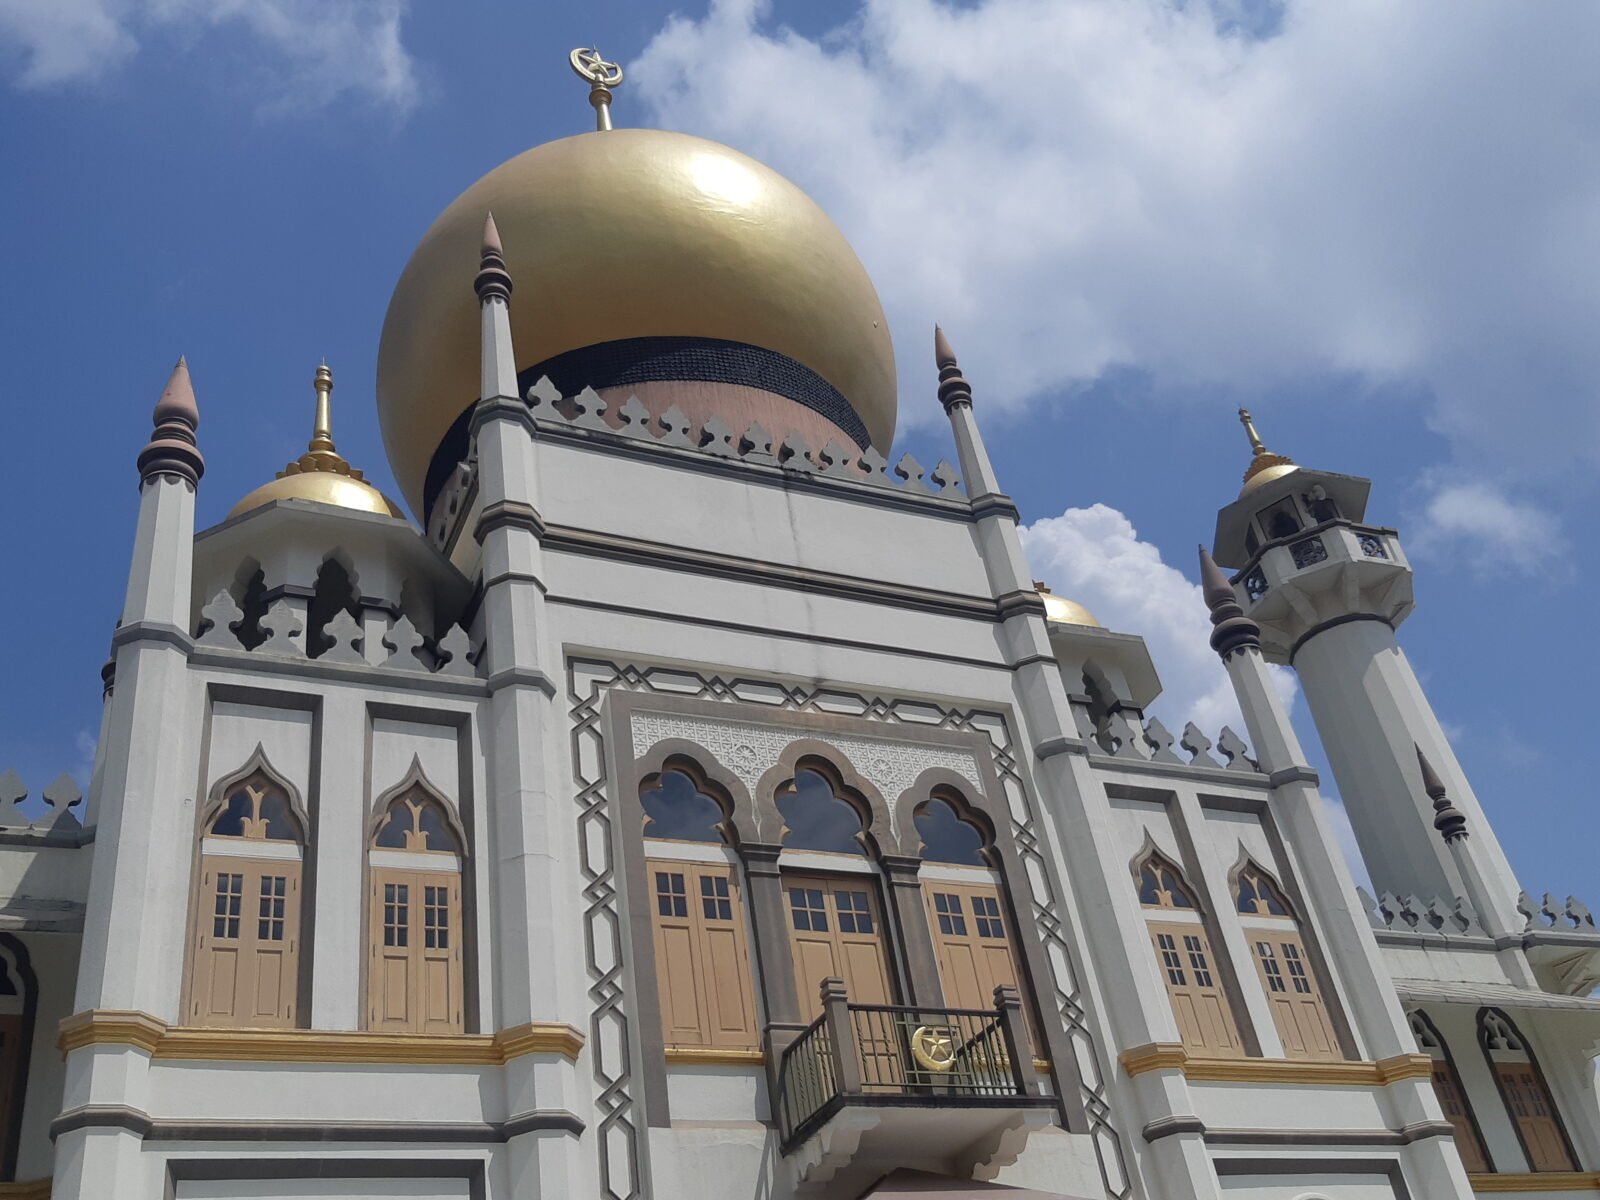 Sultan Mosque Kampong Glam Singapore